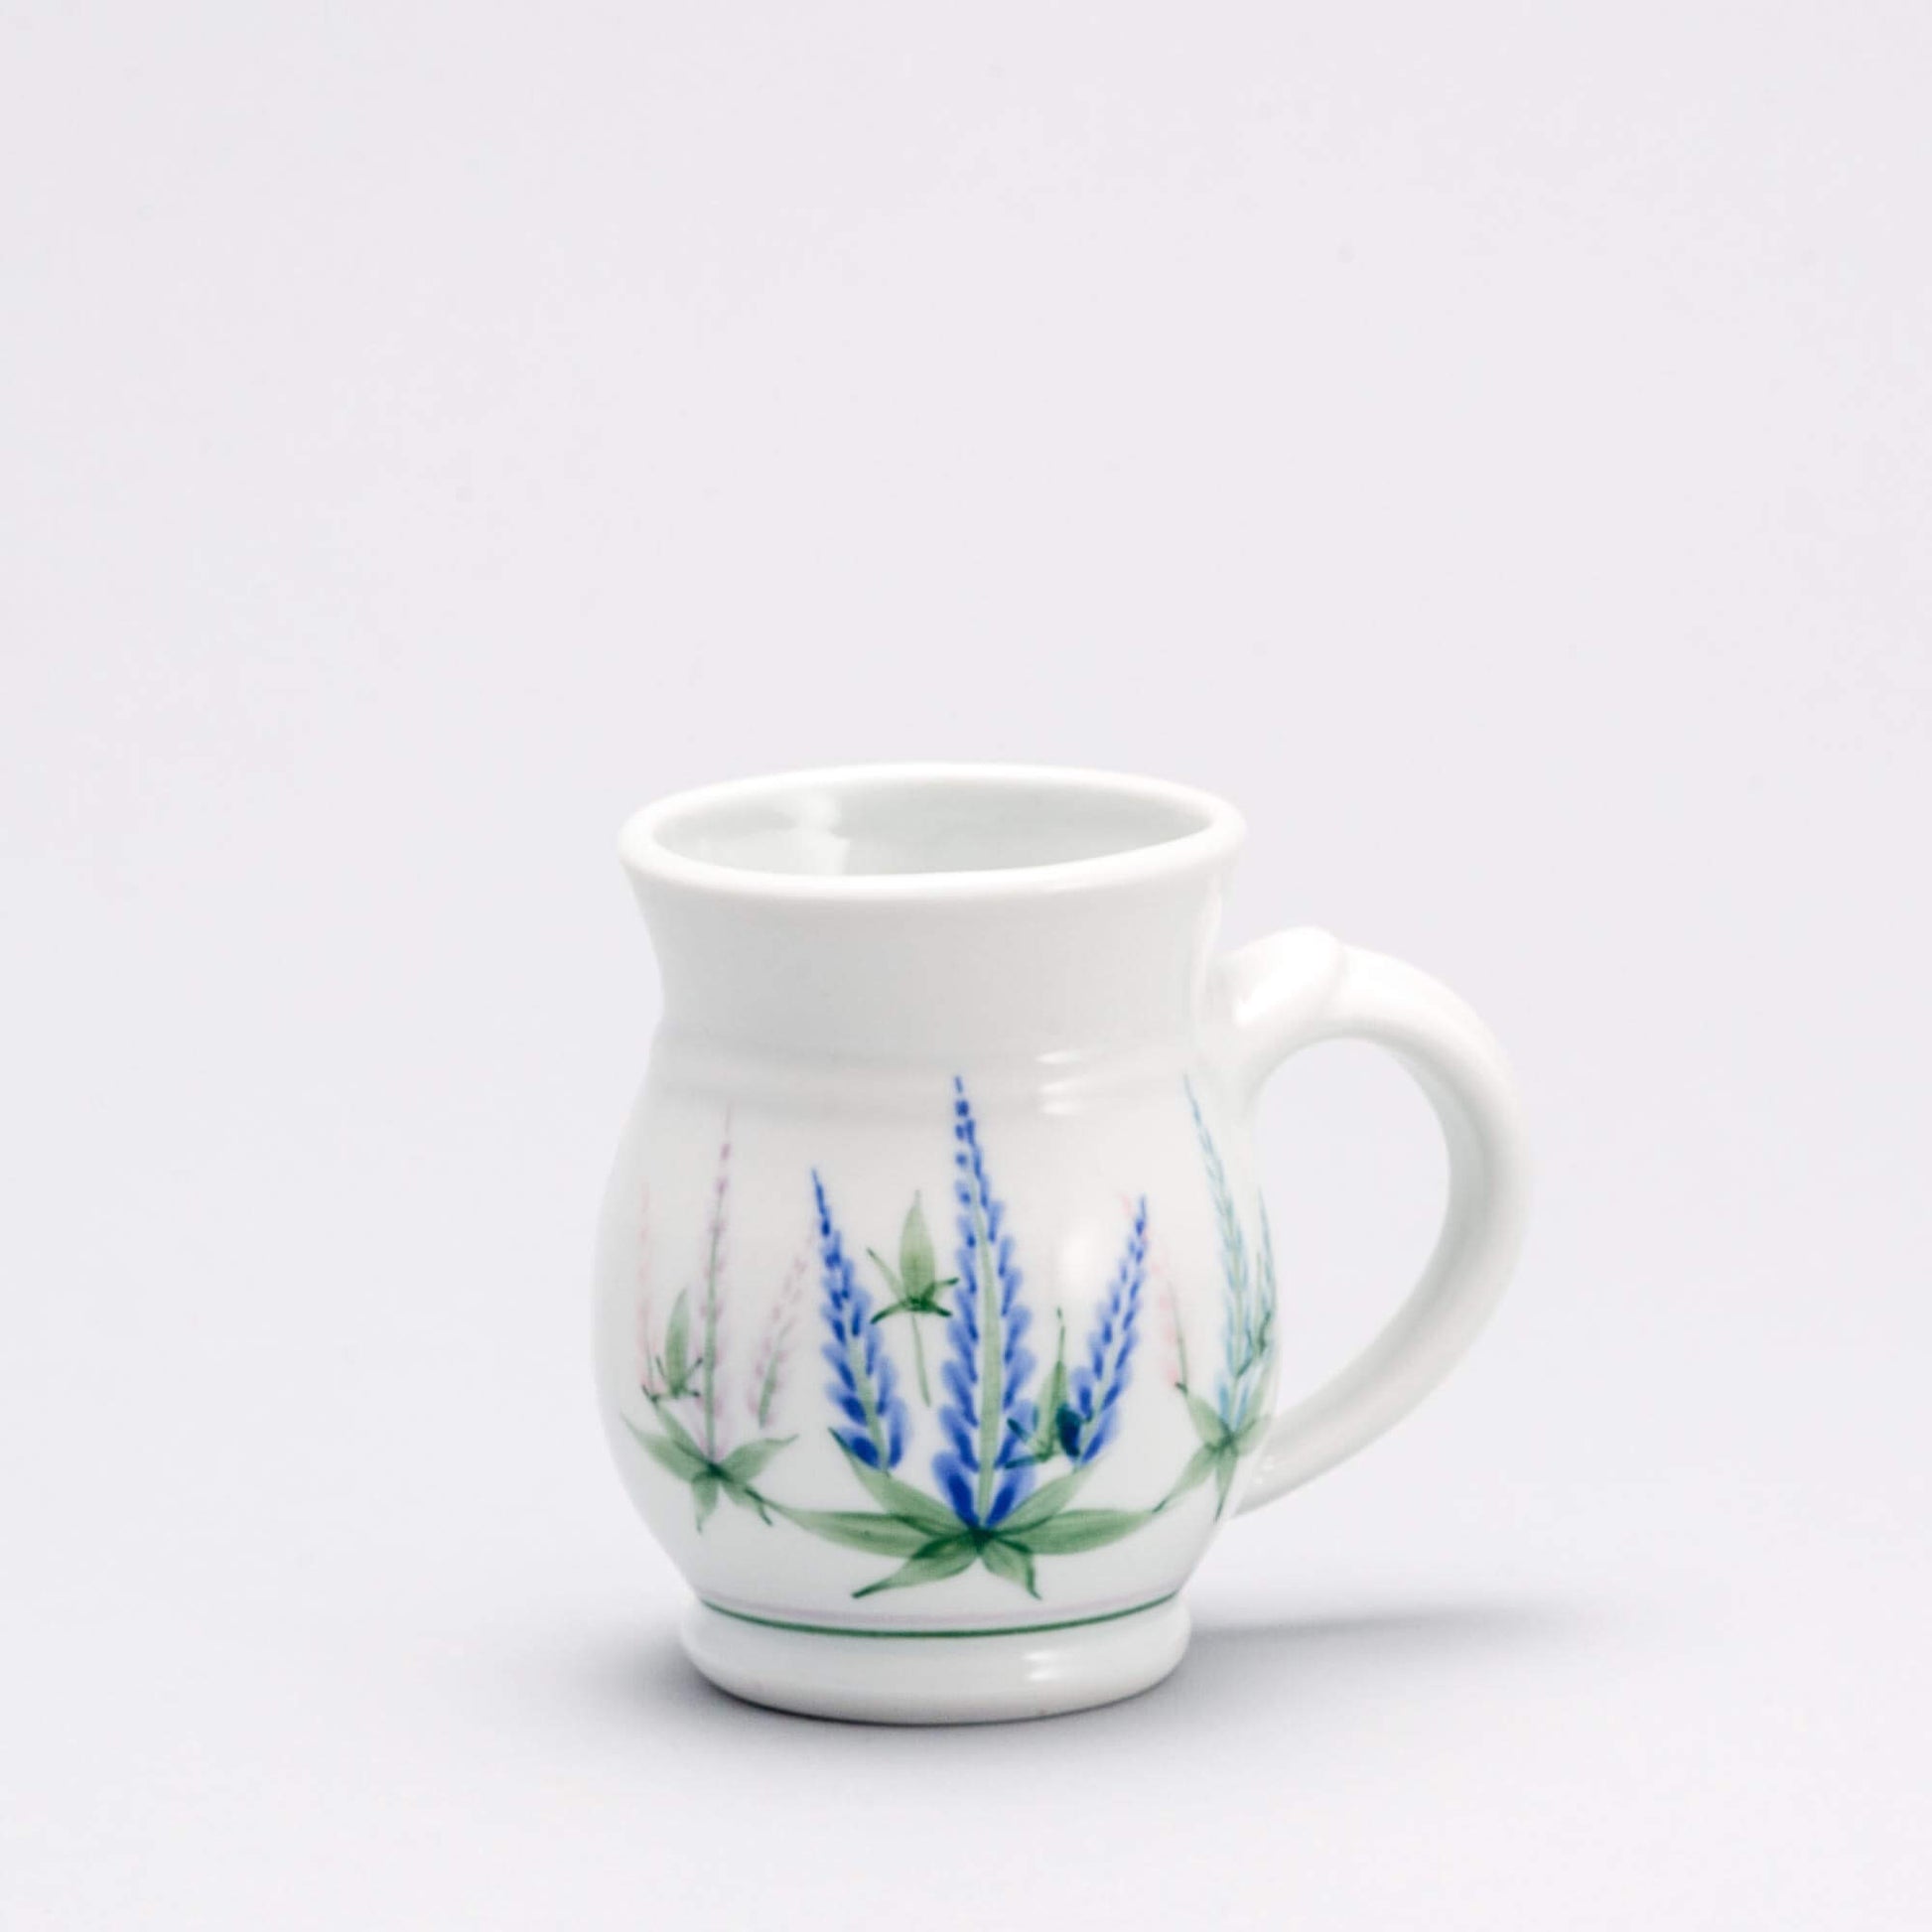 Handmade Pottery Curvy Mug made by Georgetown Pottery in Maine Lupine